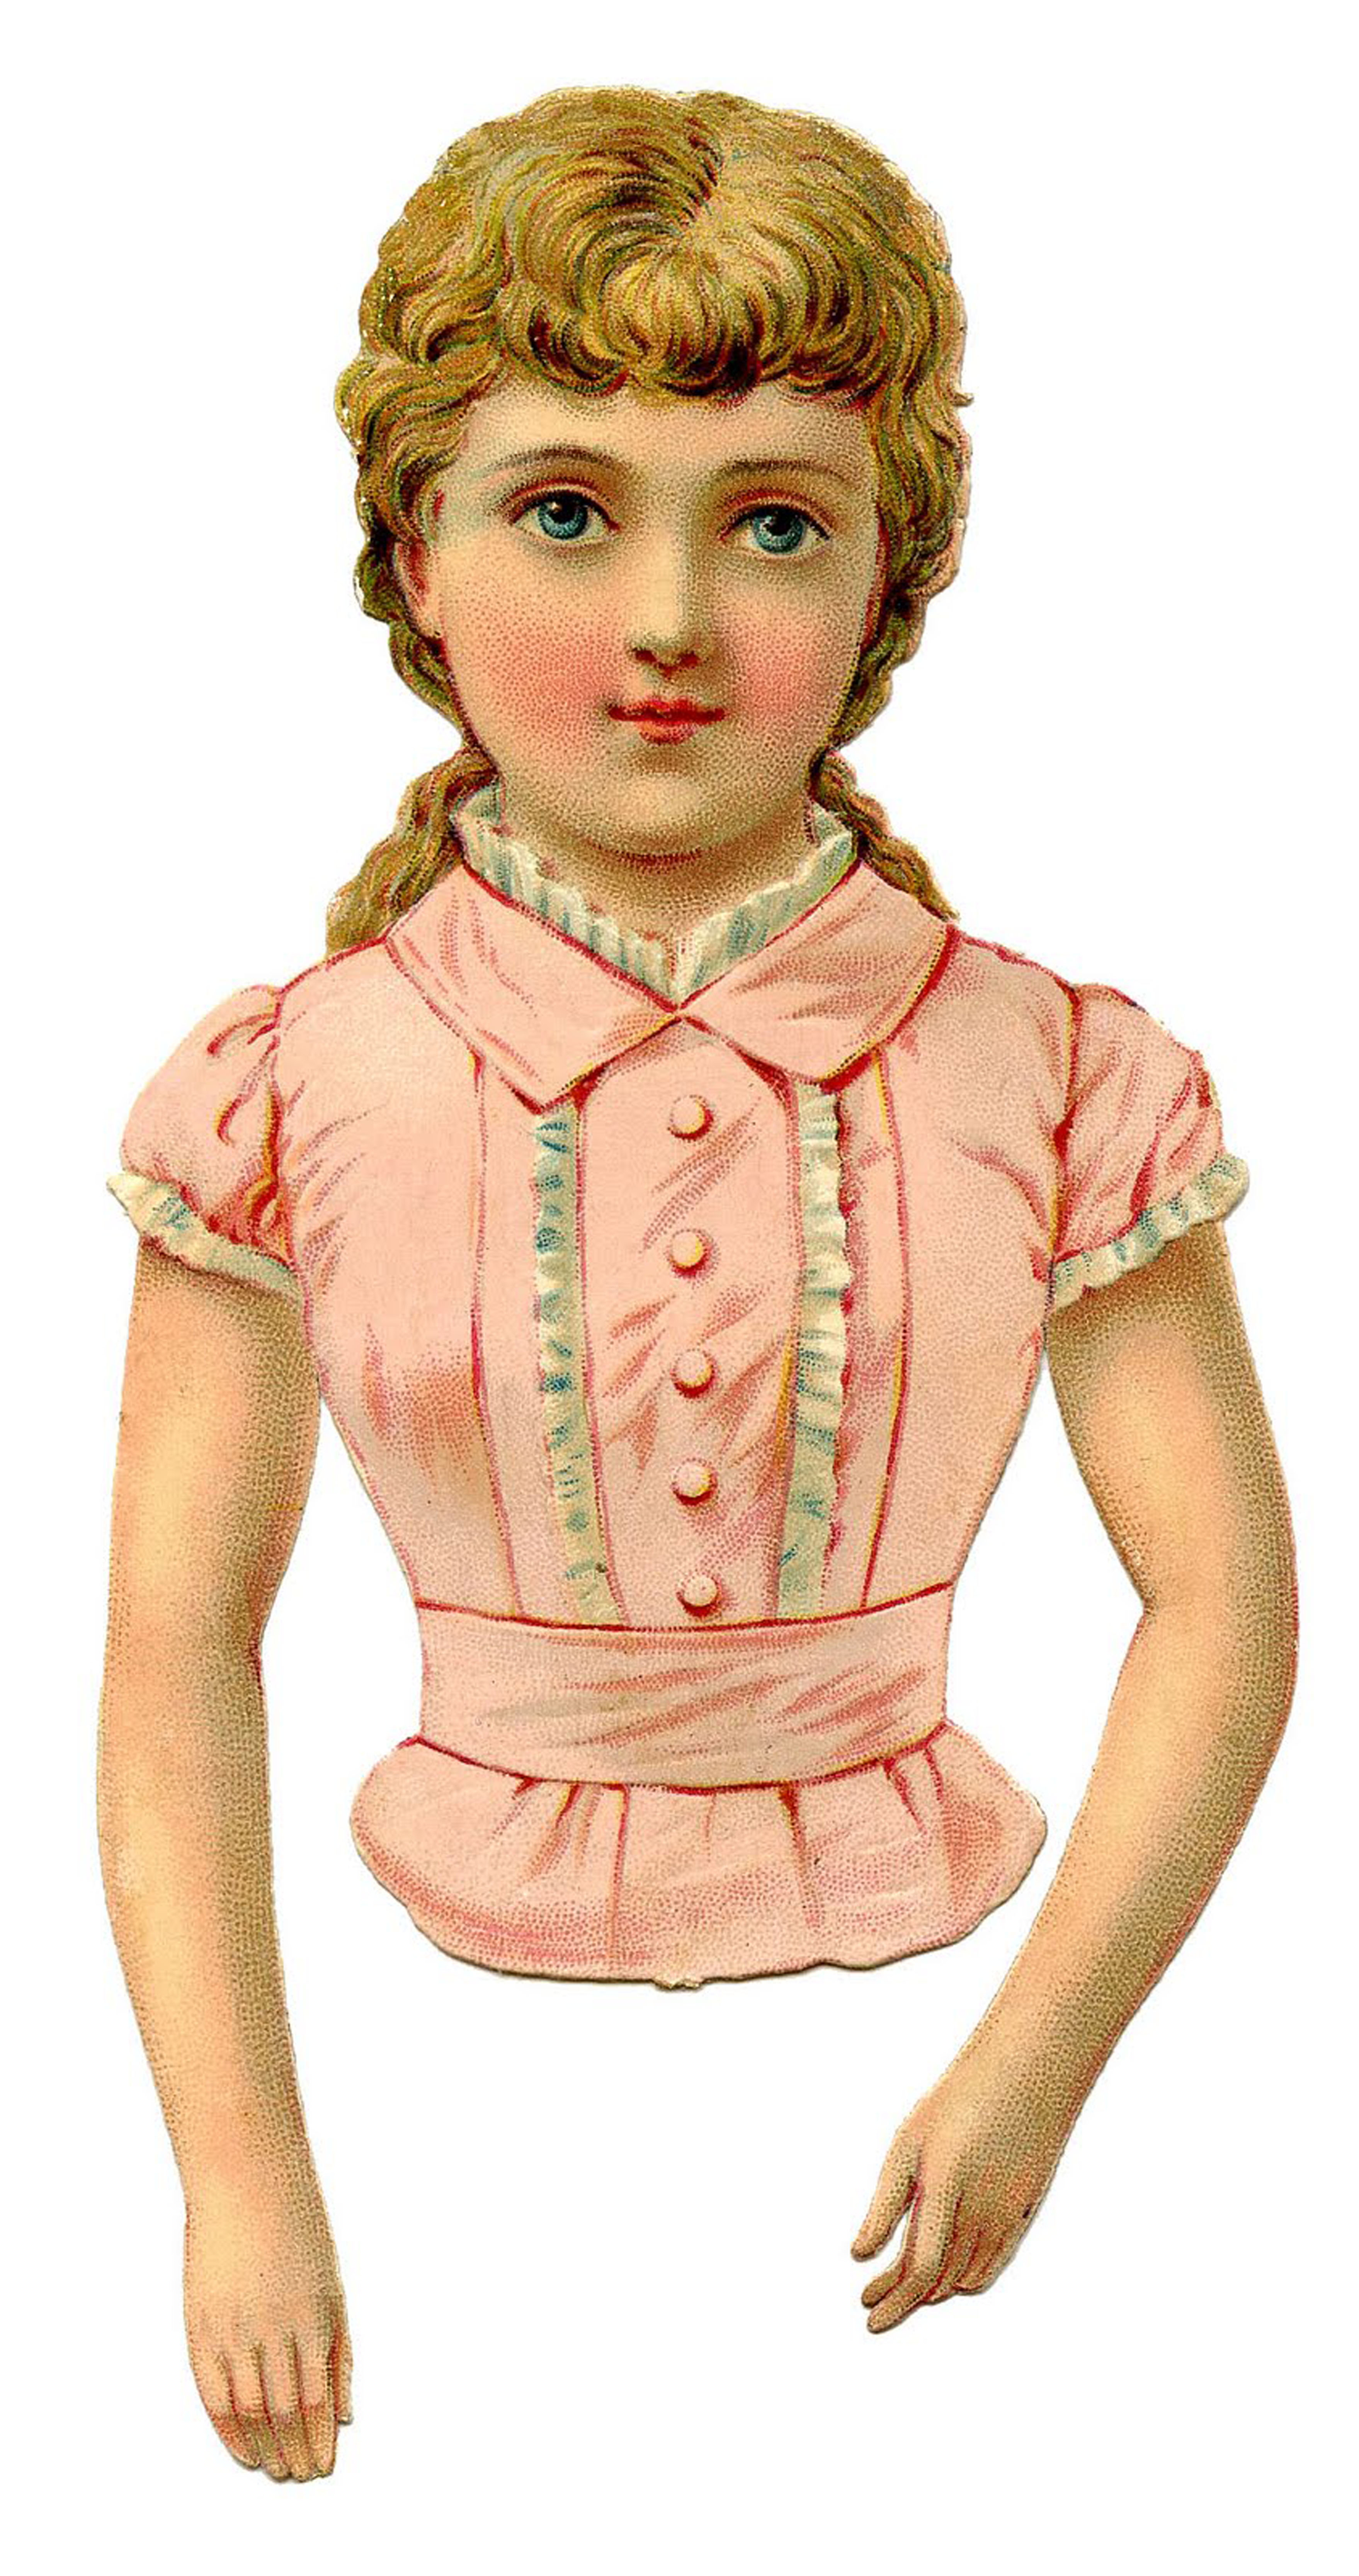 25-vintage-paper-dolls-printable-the-graphics-fairy